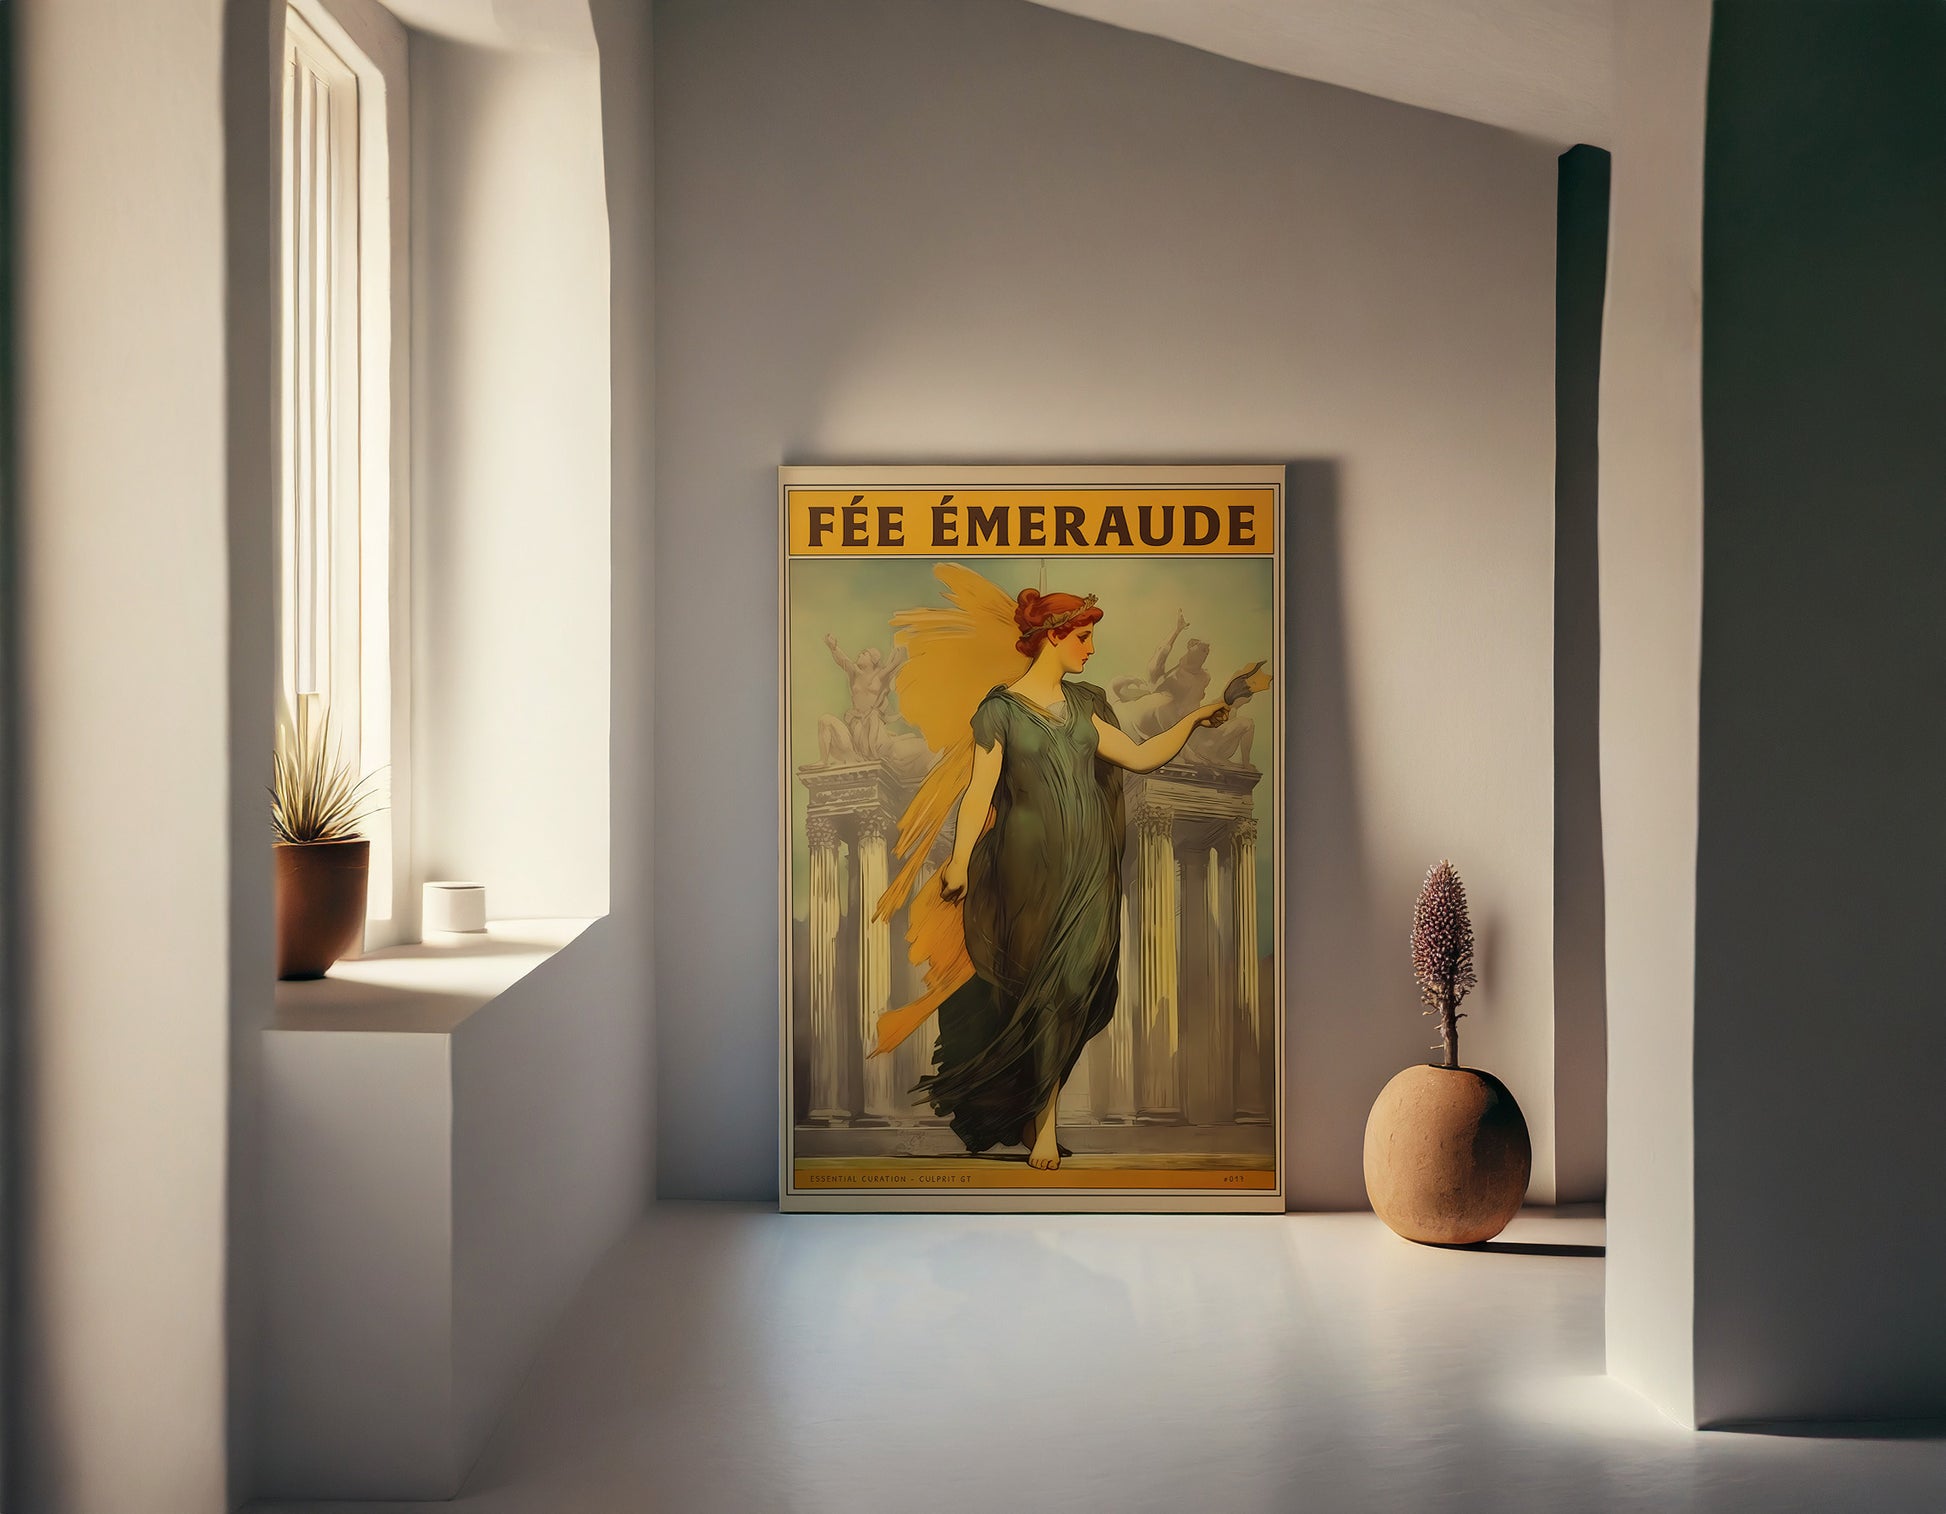 The Emerald Fairy - Mythical Art Print | Red Haired Woman in Greek Dress with Golden Wings and Tiara | Classical Greek Building - Cyclades home